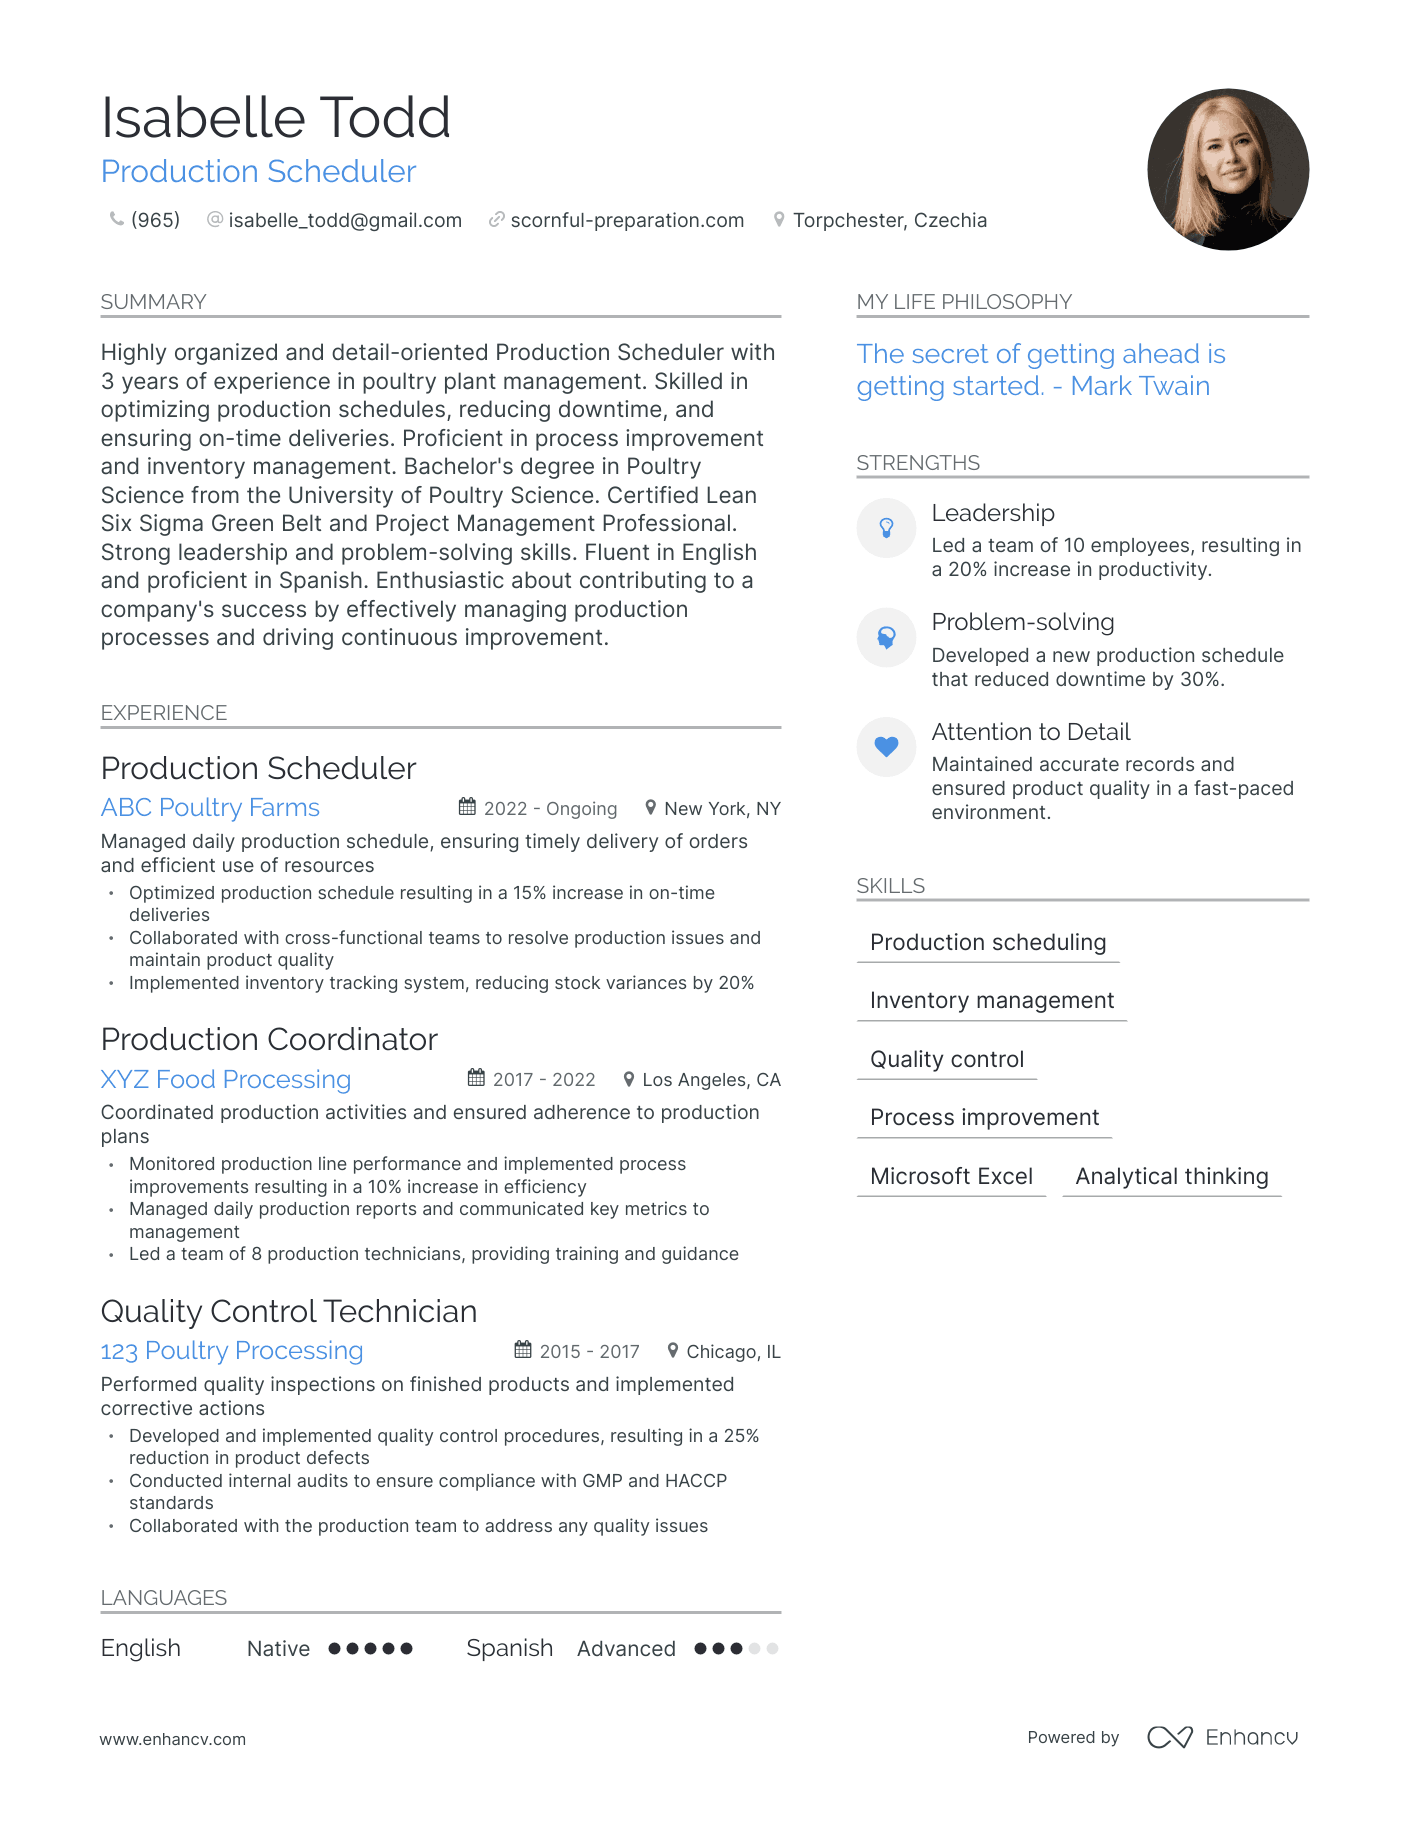 Production Scheduler resume example